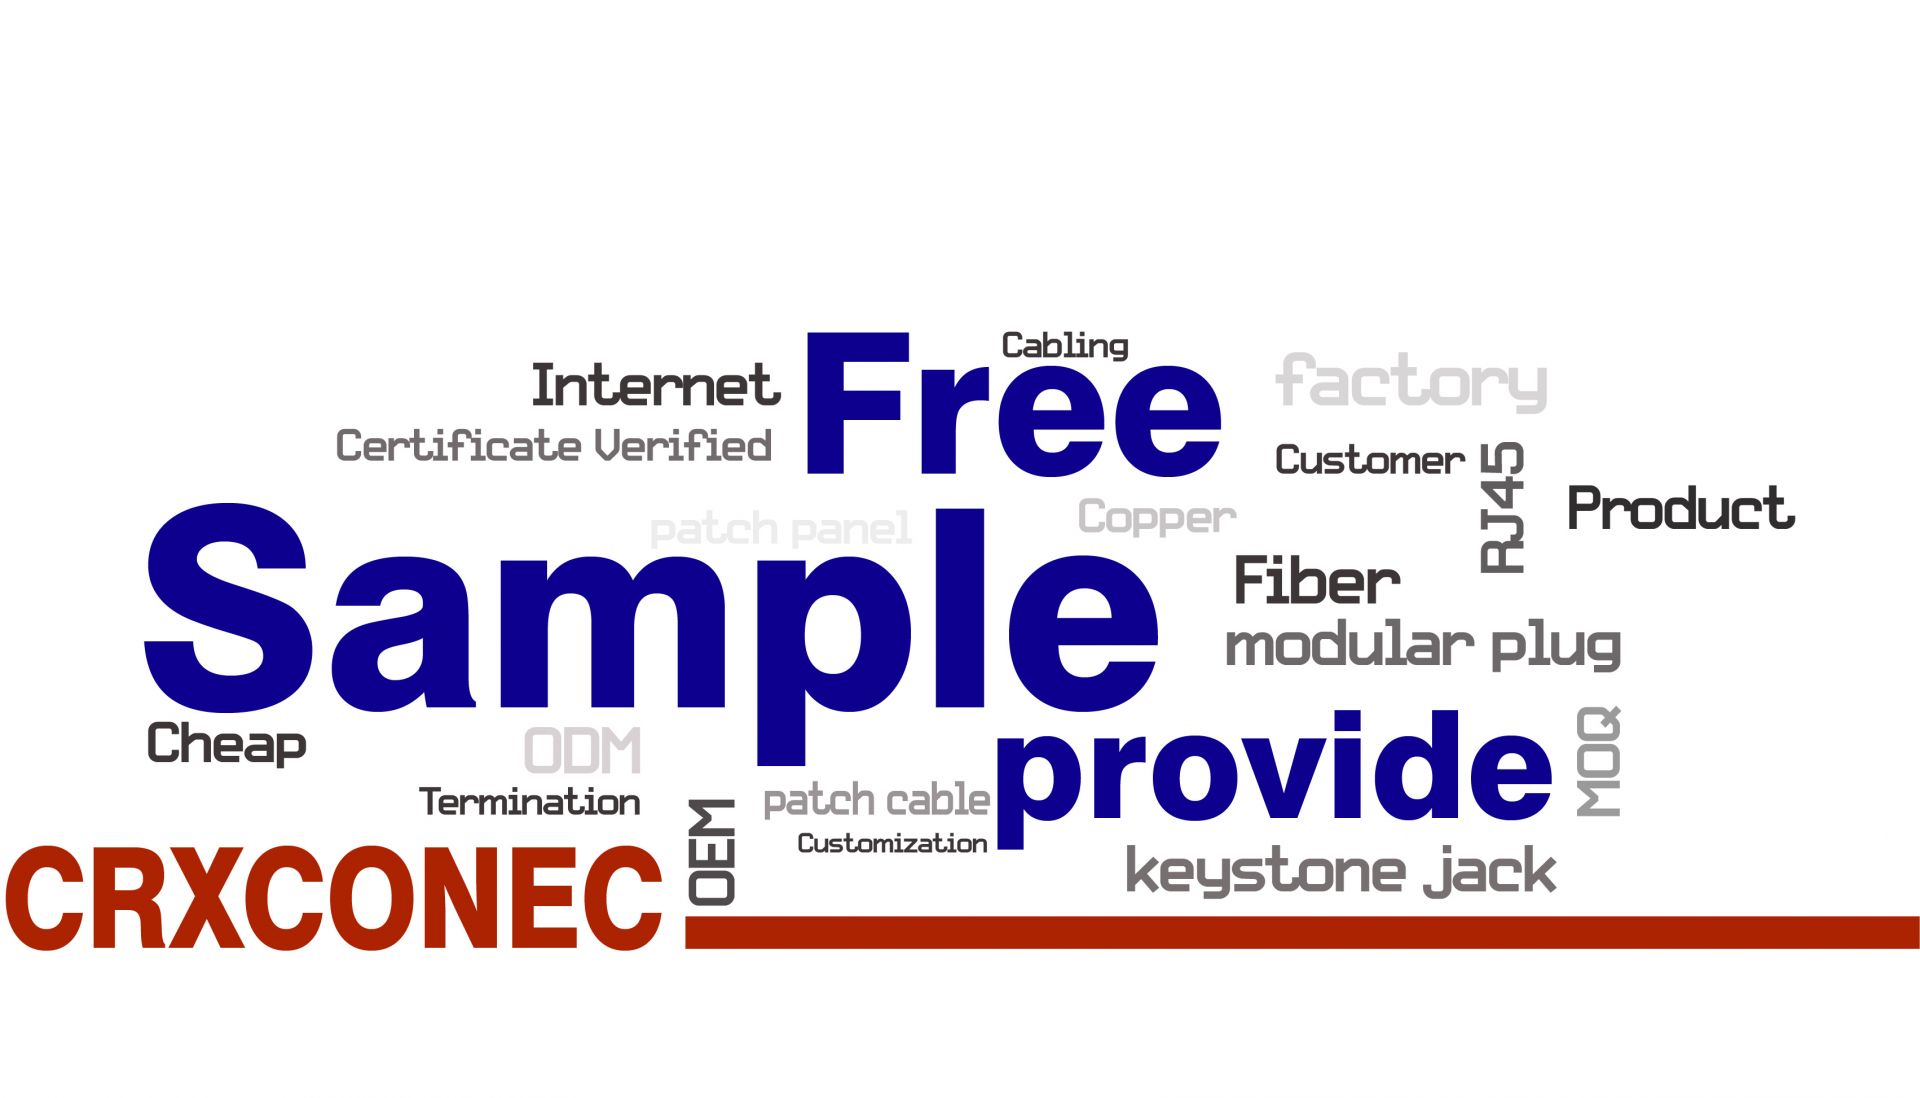 Contact us for  Free RJ45 keystone jack patch cable samples